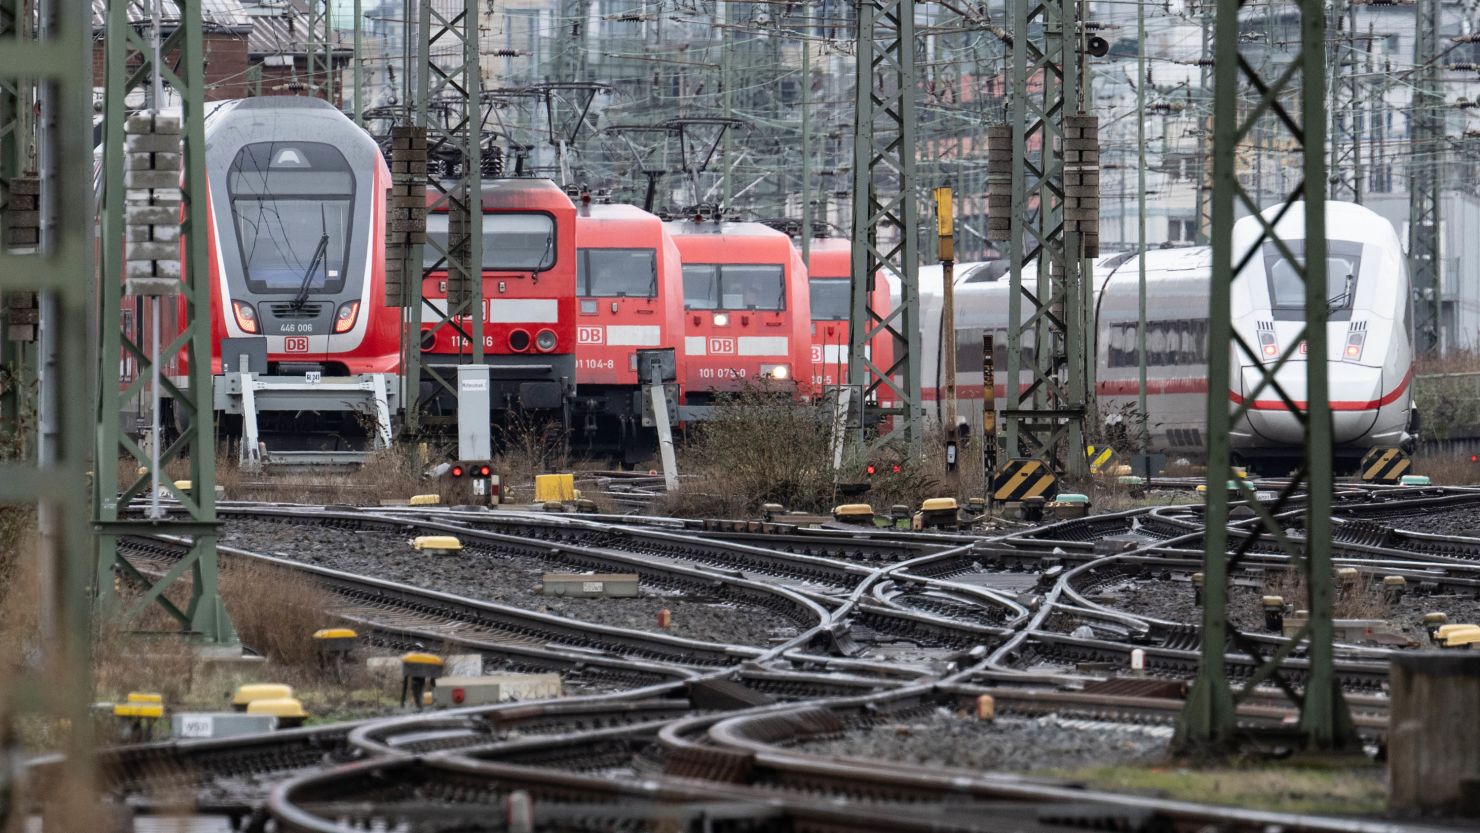 Deutsche Bahn passenger trains outside the Frankfurt am Main central station in Germany earlier this month. Unionized train drivers went on strike earlier in January, straining supply chains and dealing a new<strong> </strong>blow to the country's sputtering economy.